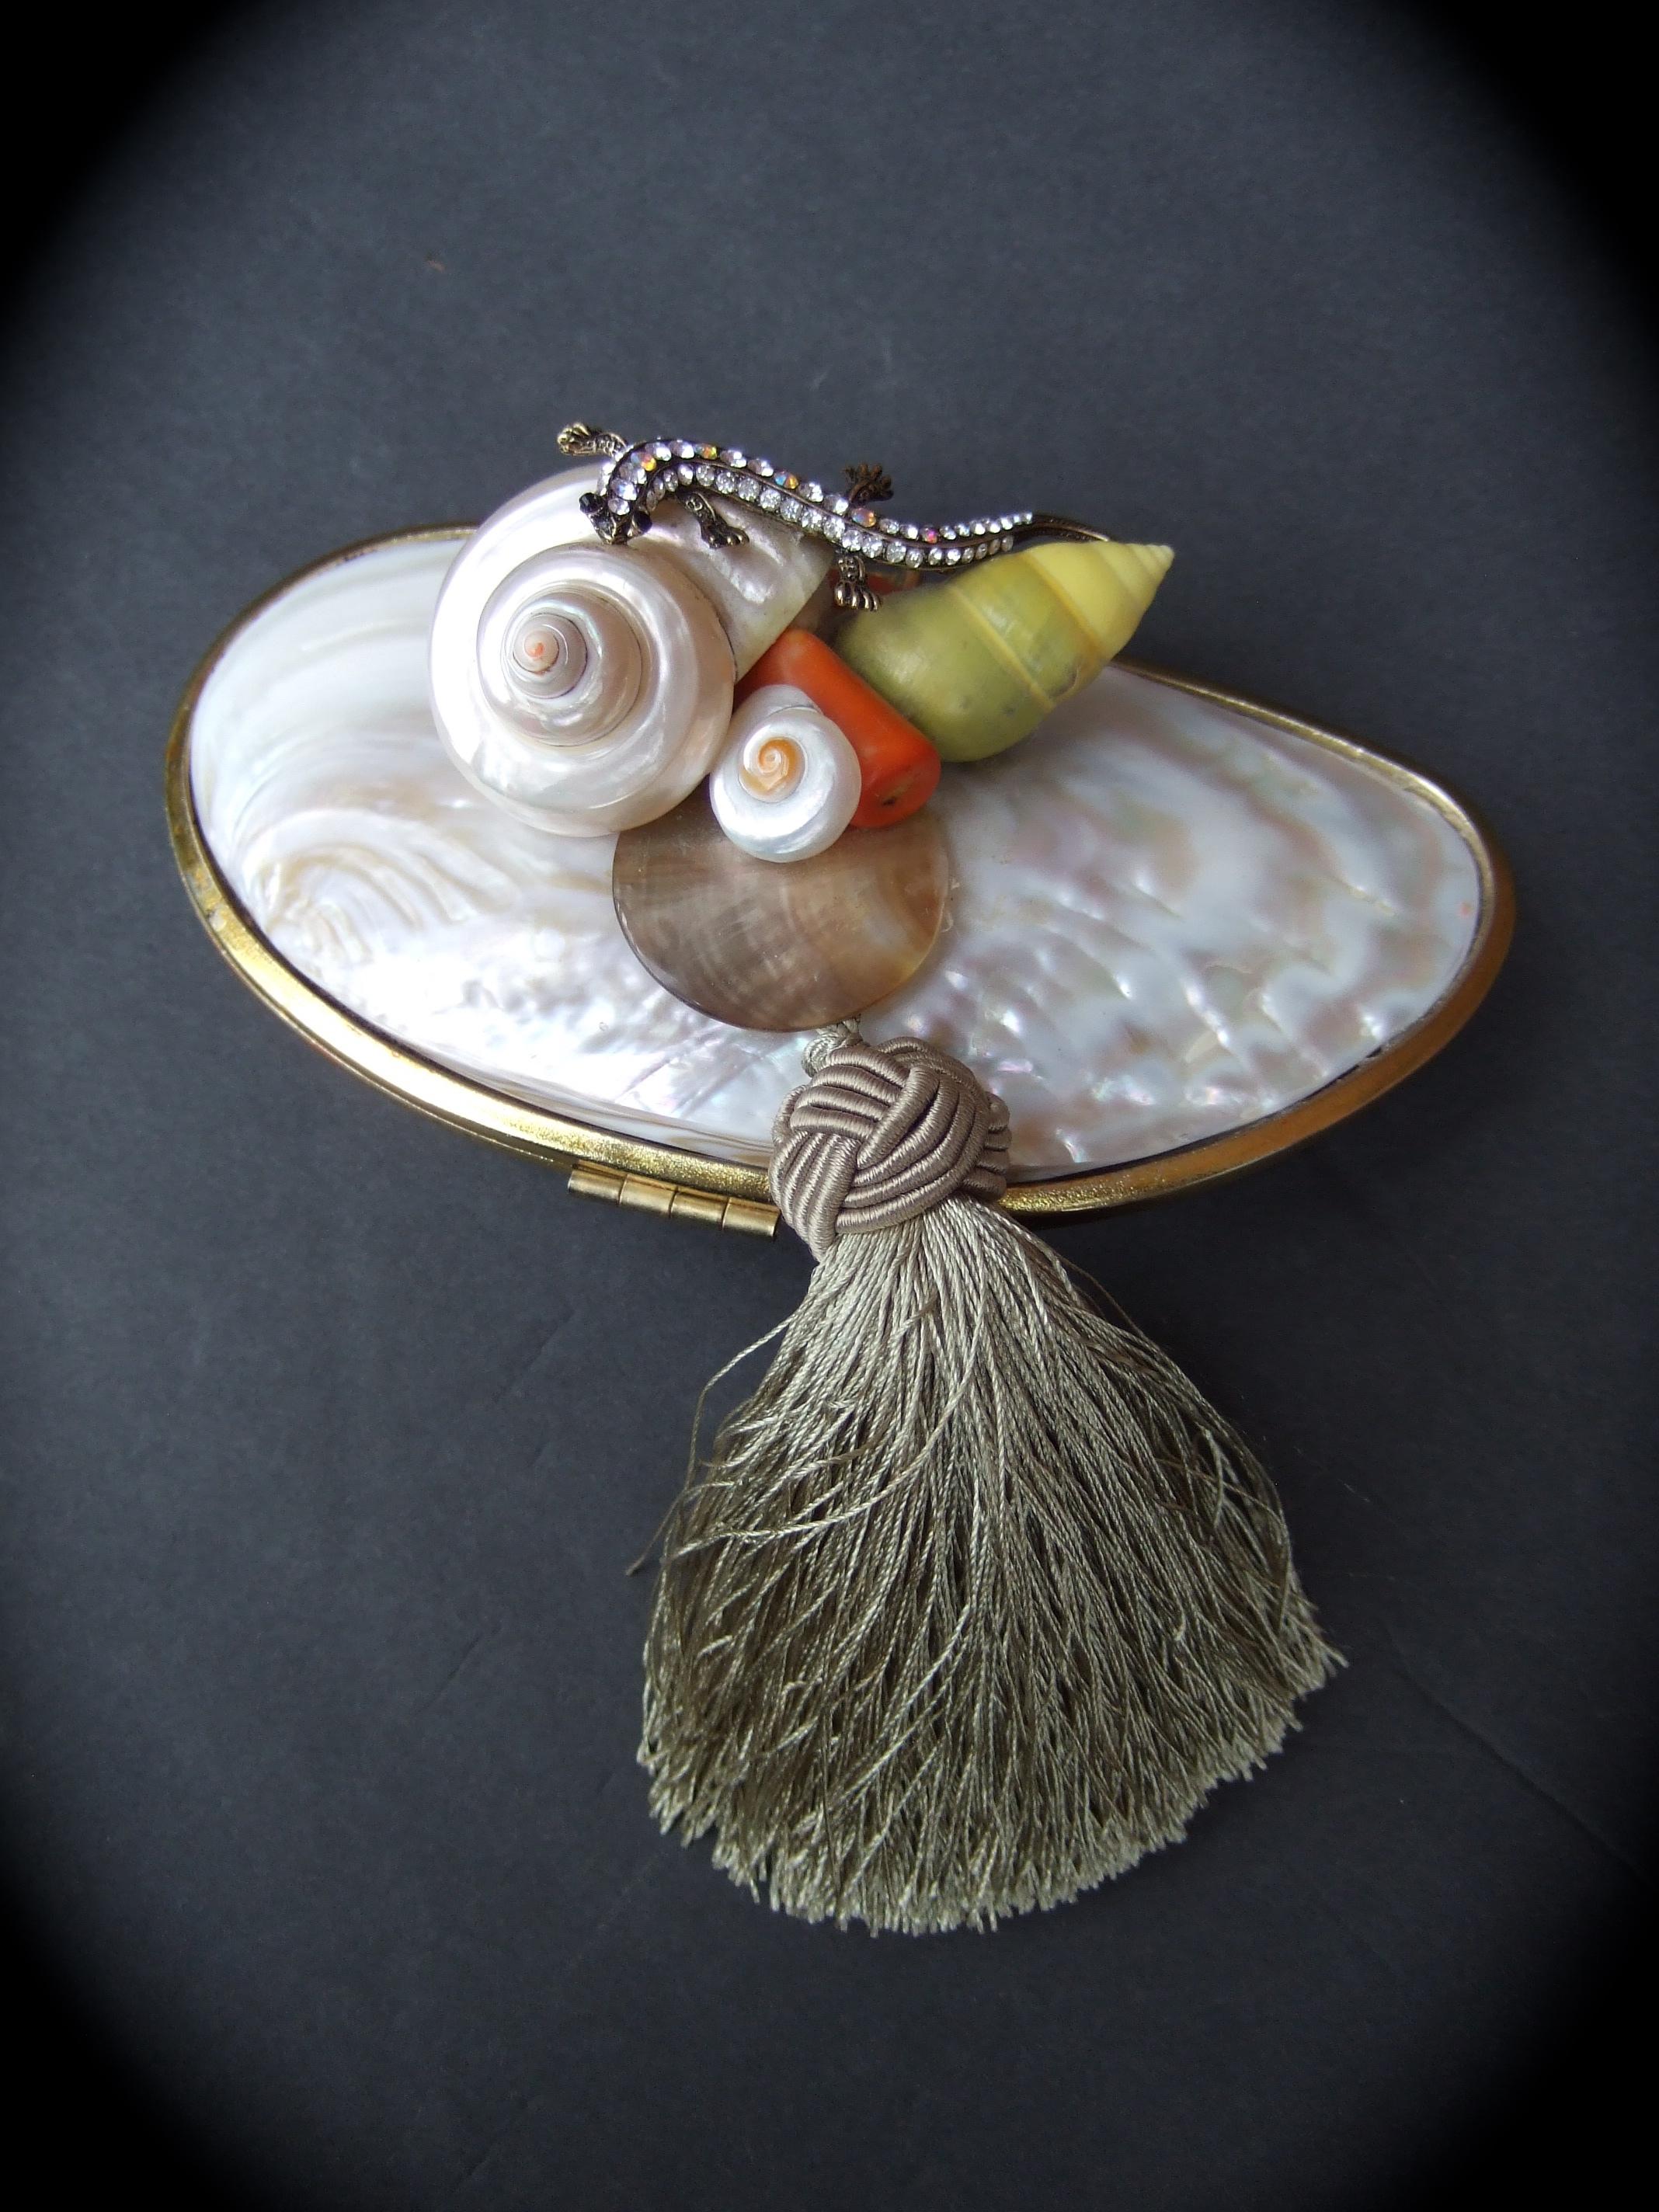 Opulent mother of pearl crystal lizard encrusted artisan clutch purse c 1970s
The exquisite artisan clutch is designed with an organic mother of pearl clam shell 
Embellished with a sinuous crystal lizard; surrounded with a collection 
of sea shells